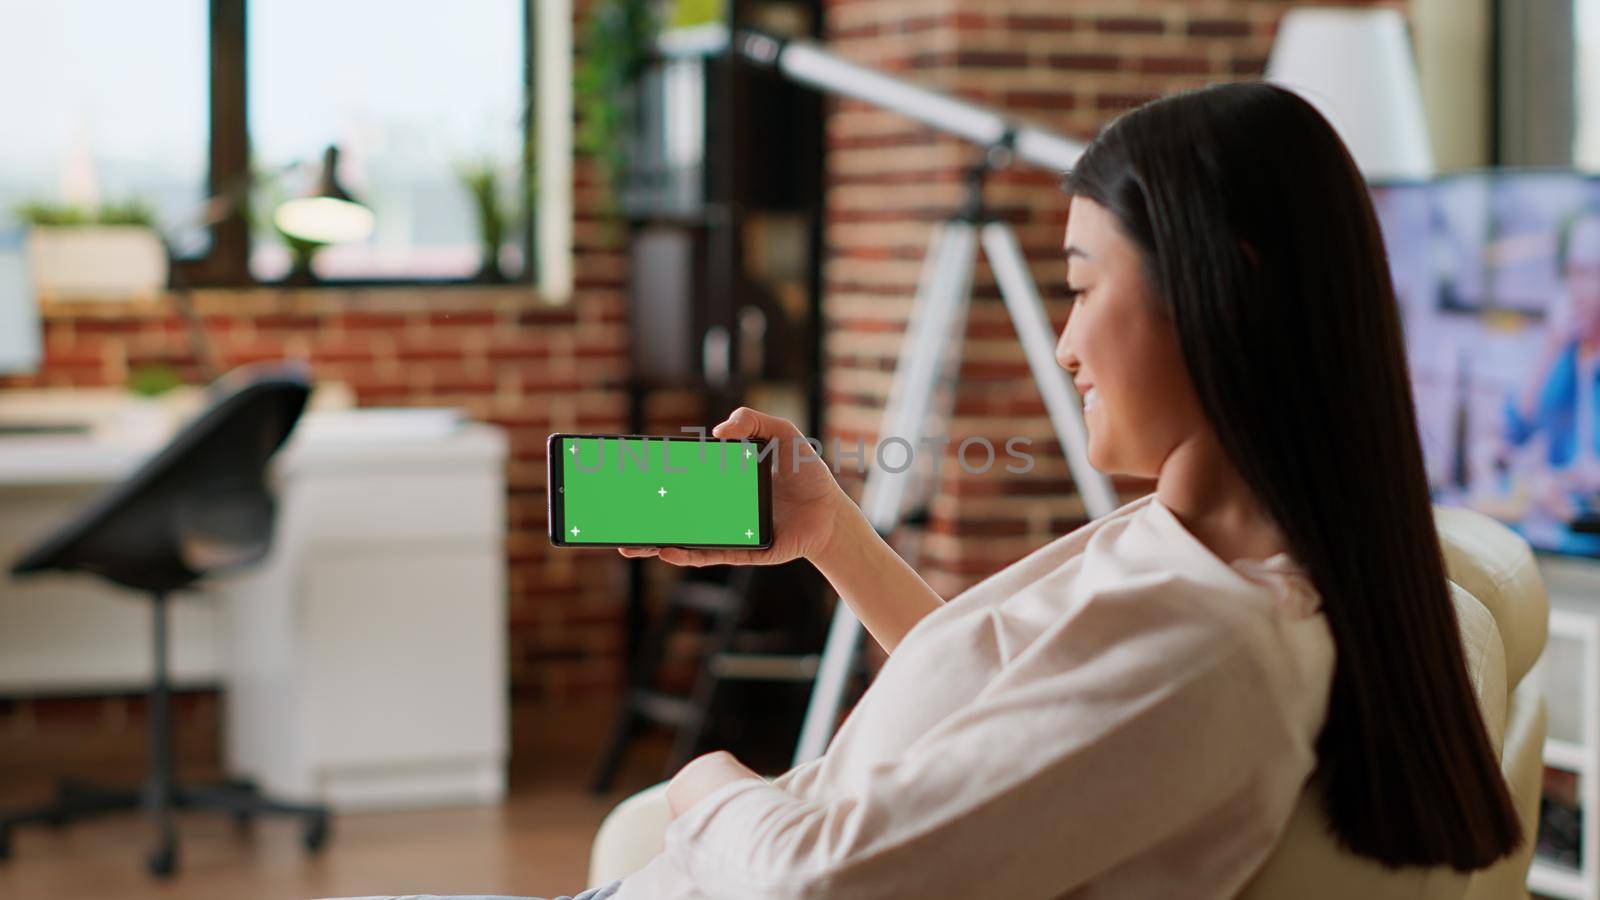 Happy asian person with mobile phone having mockup isolated display while sitting on sofa at home. Smiling woman having smartphone with green screen chroma key background.